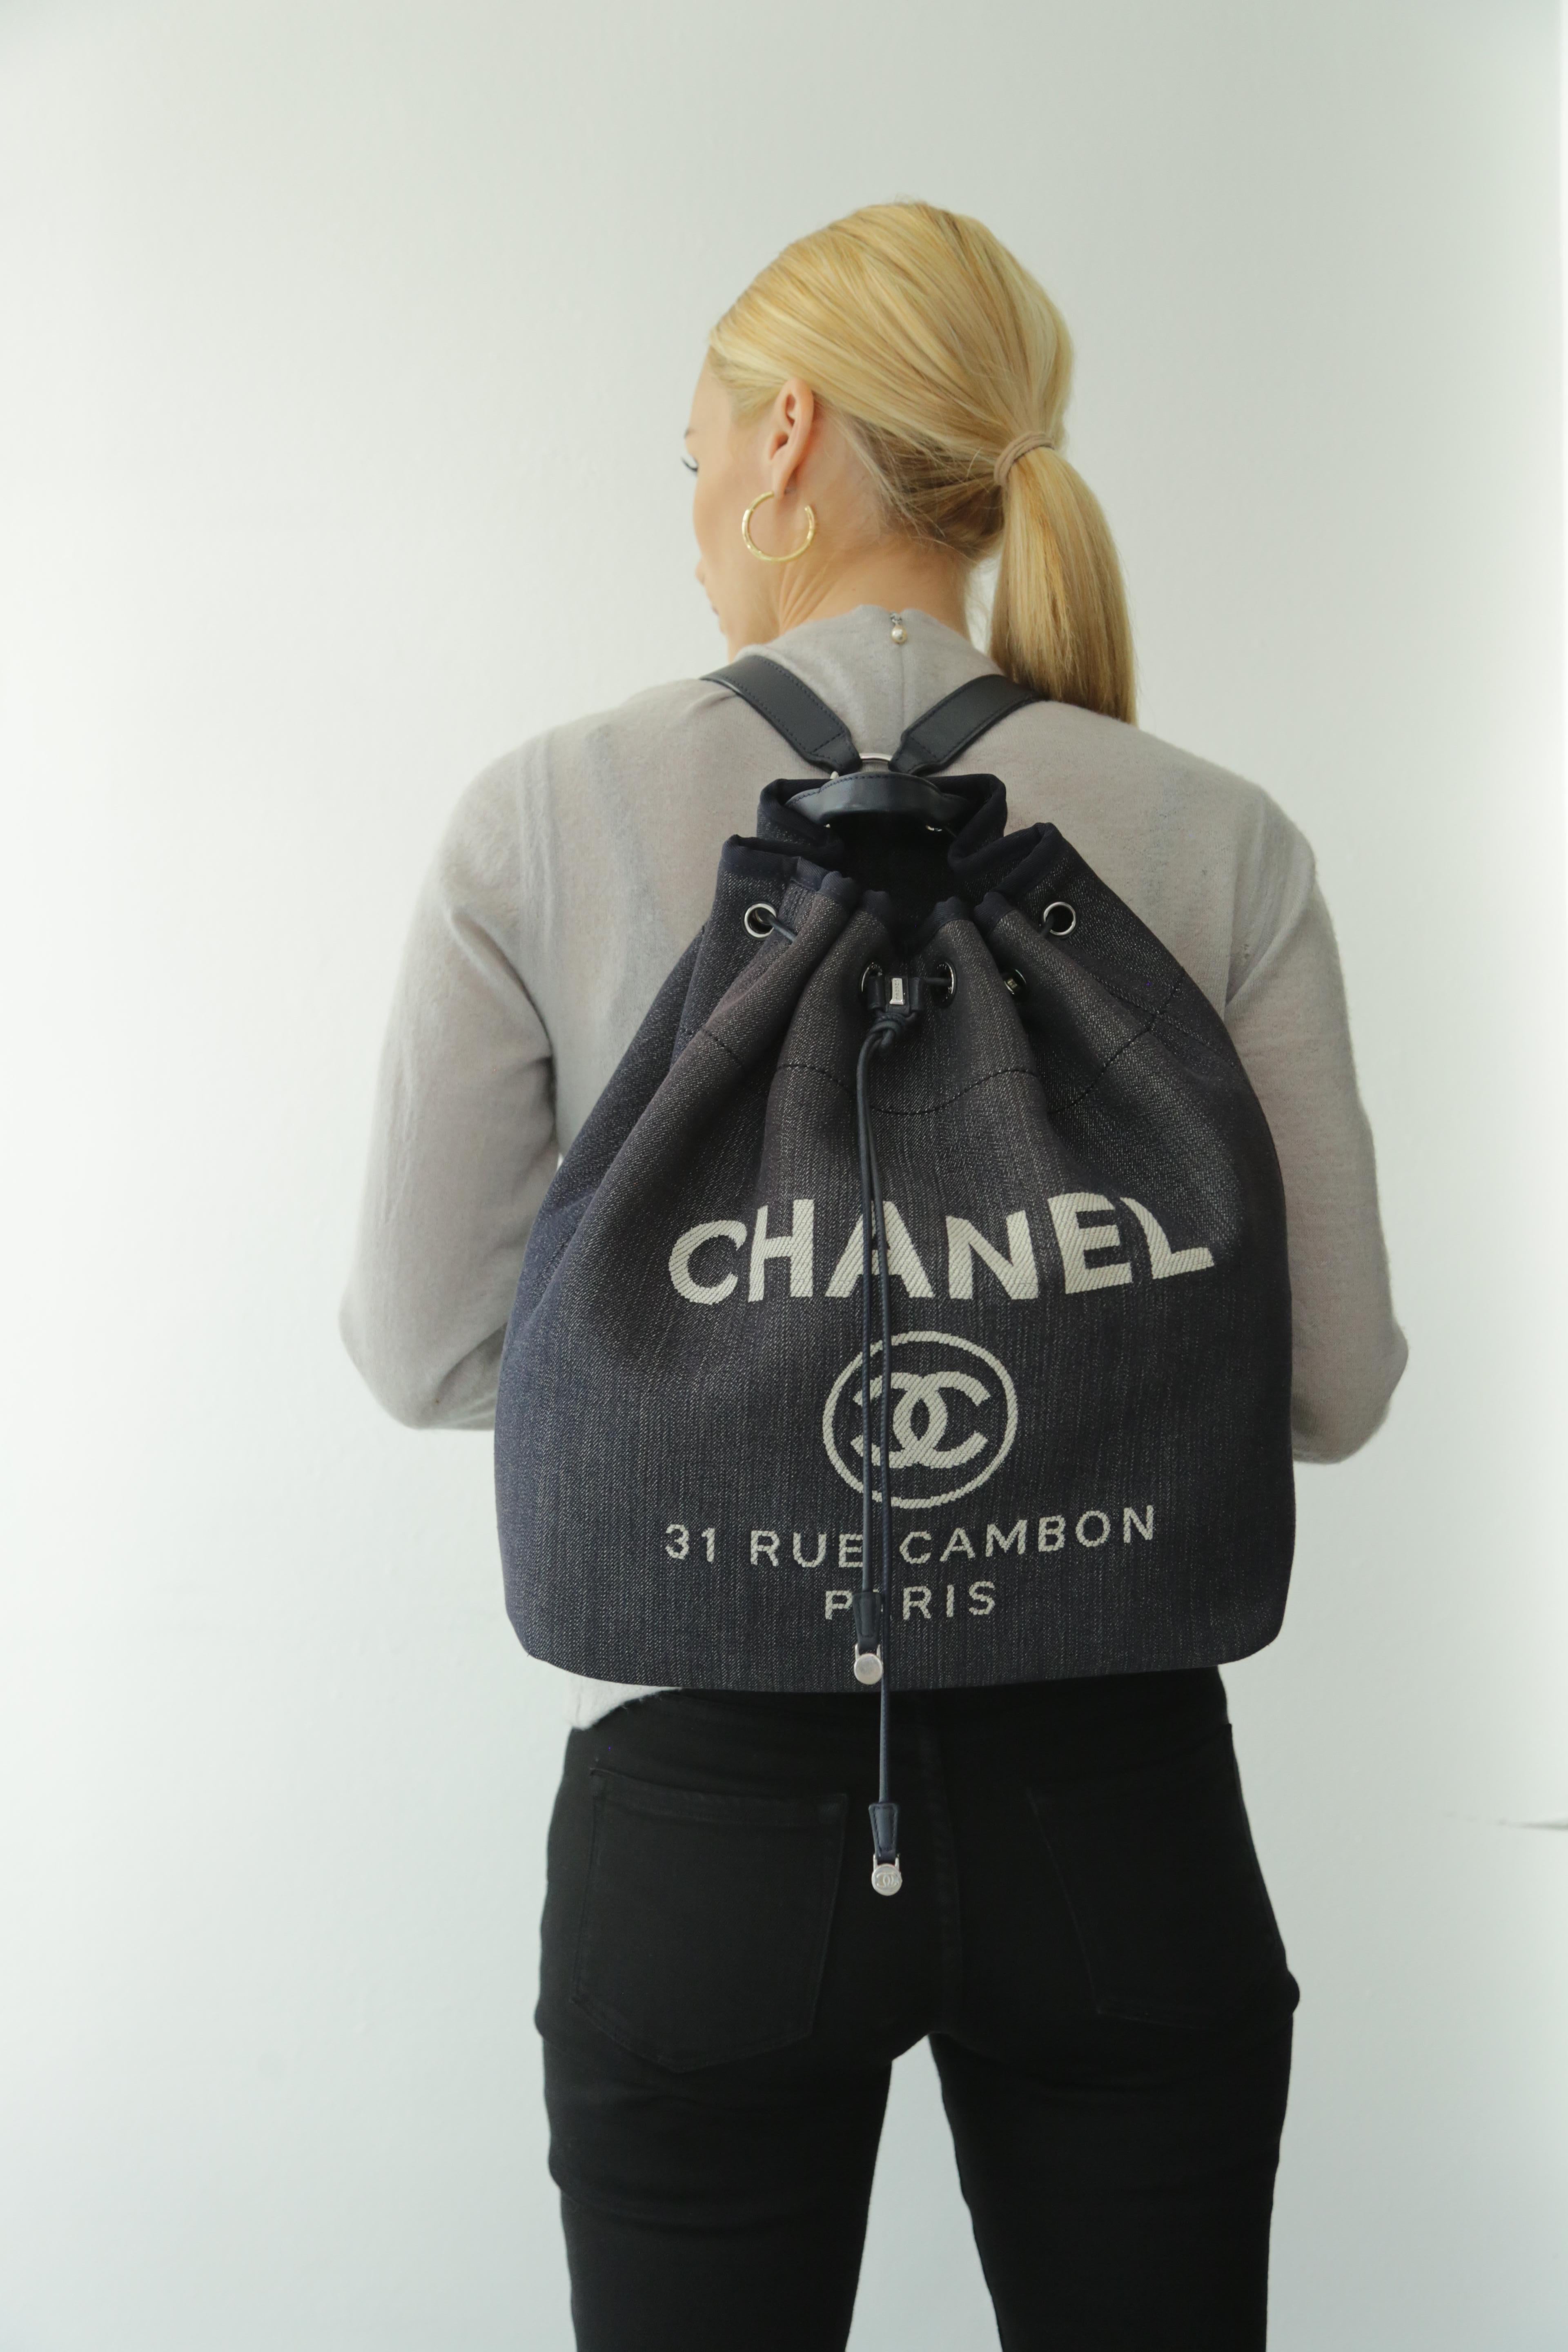 Chanel Canvas, Large Deauville Backpack in Denim Blue, 
Super hard to find style and fabric combo! Sold out everywhere. 
This lovely backpack is crafted of a fine blue denim canvas with a white stitched Chanel advertisement logo. The backpack